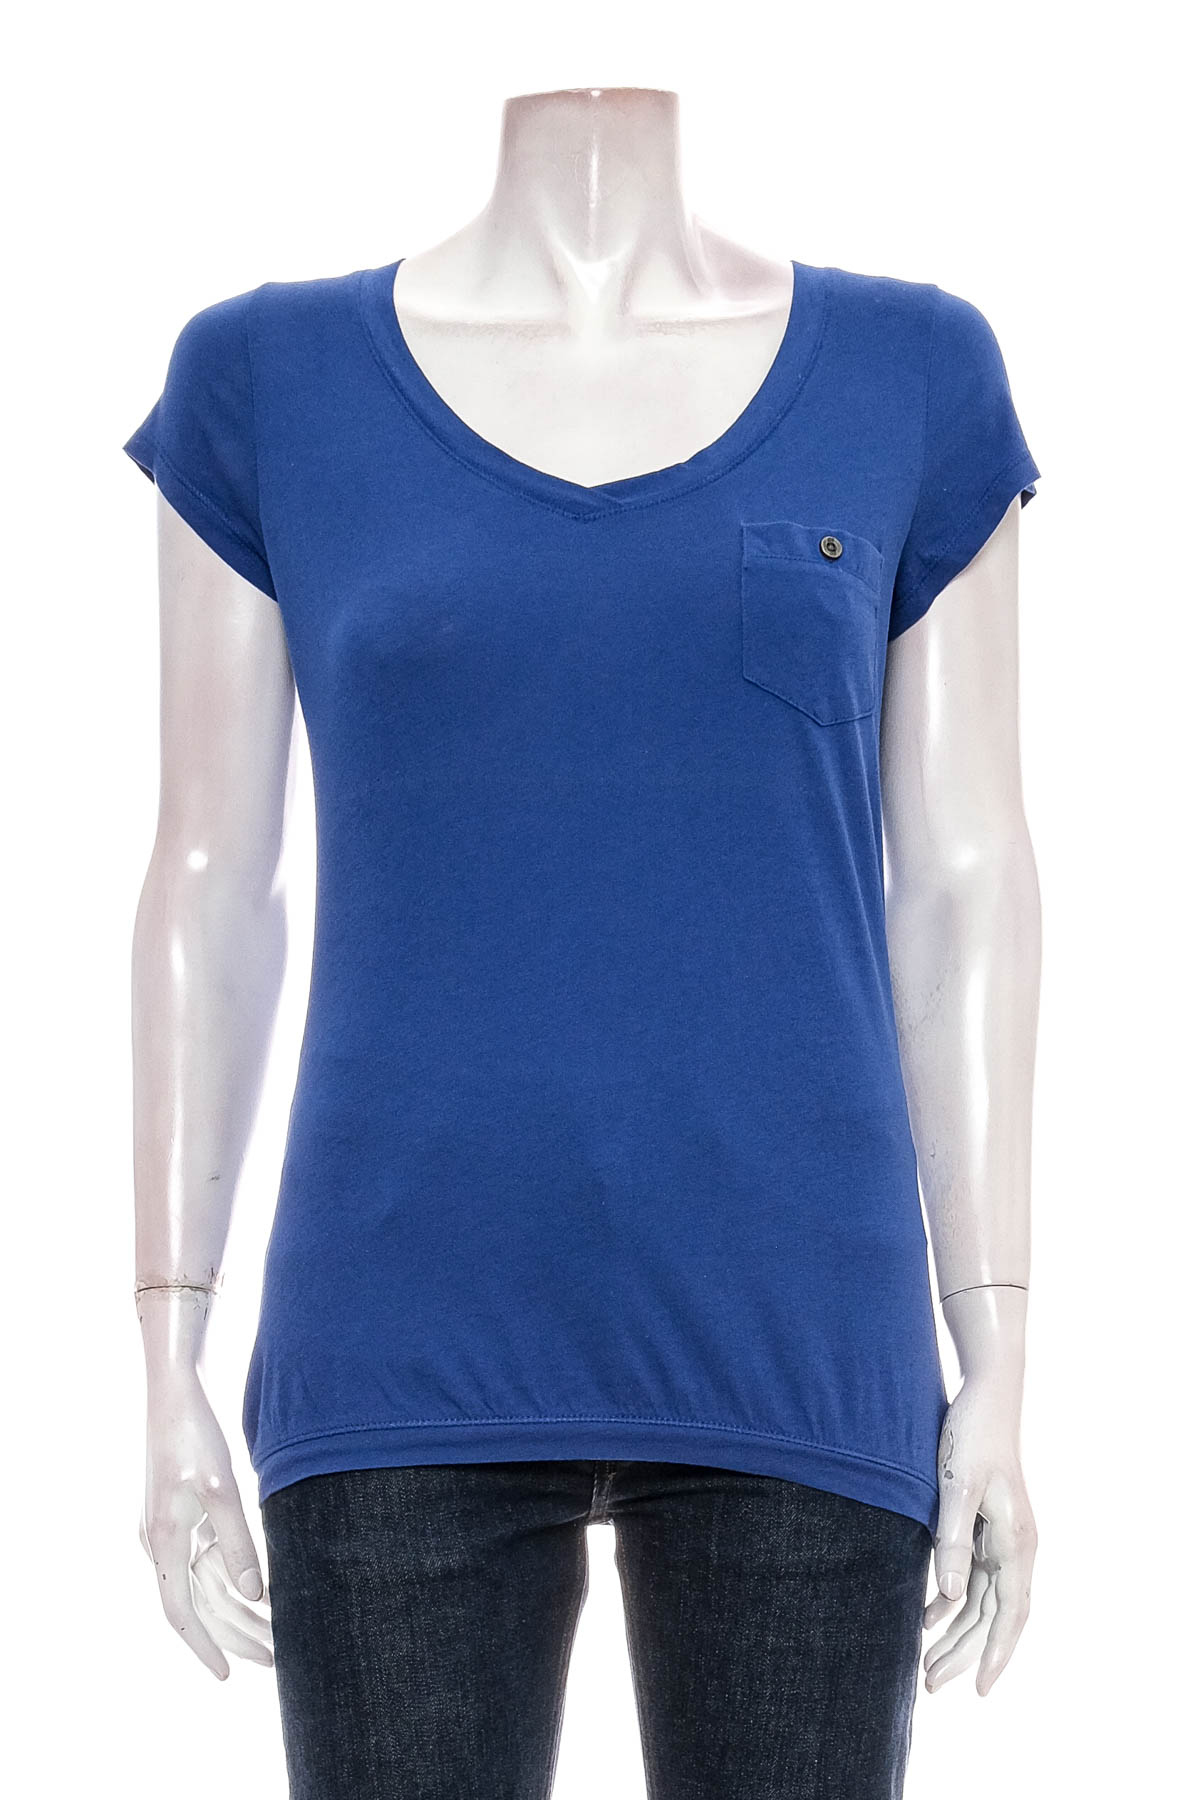 Women's t-shirt - QS by S.Oliver - 0